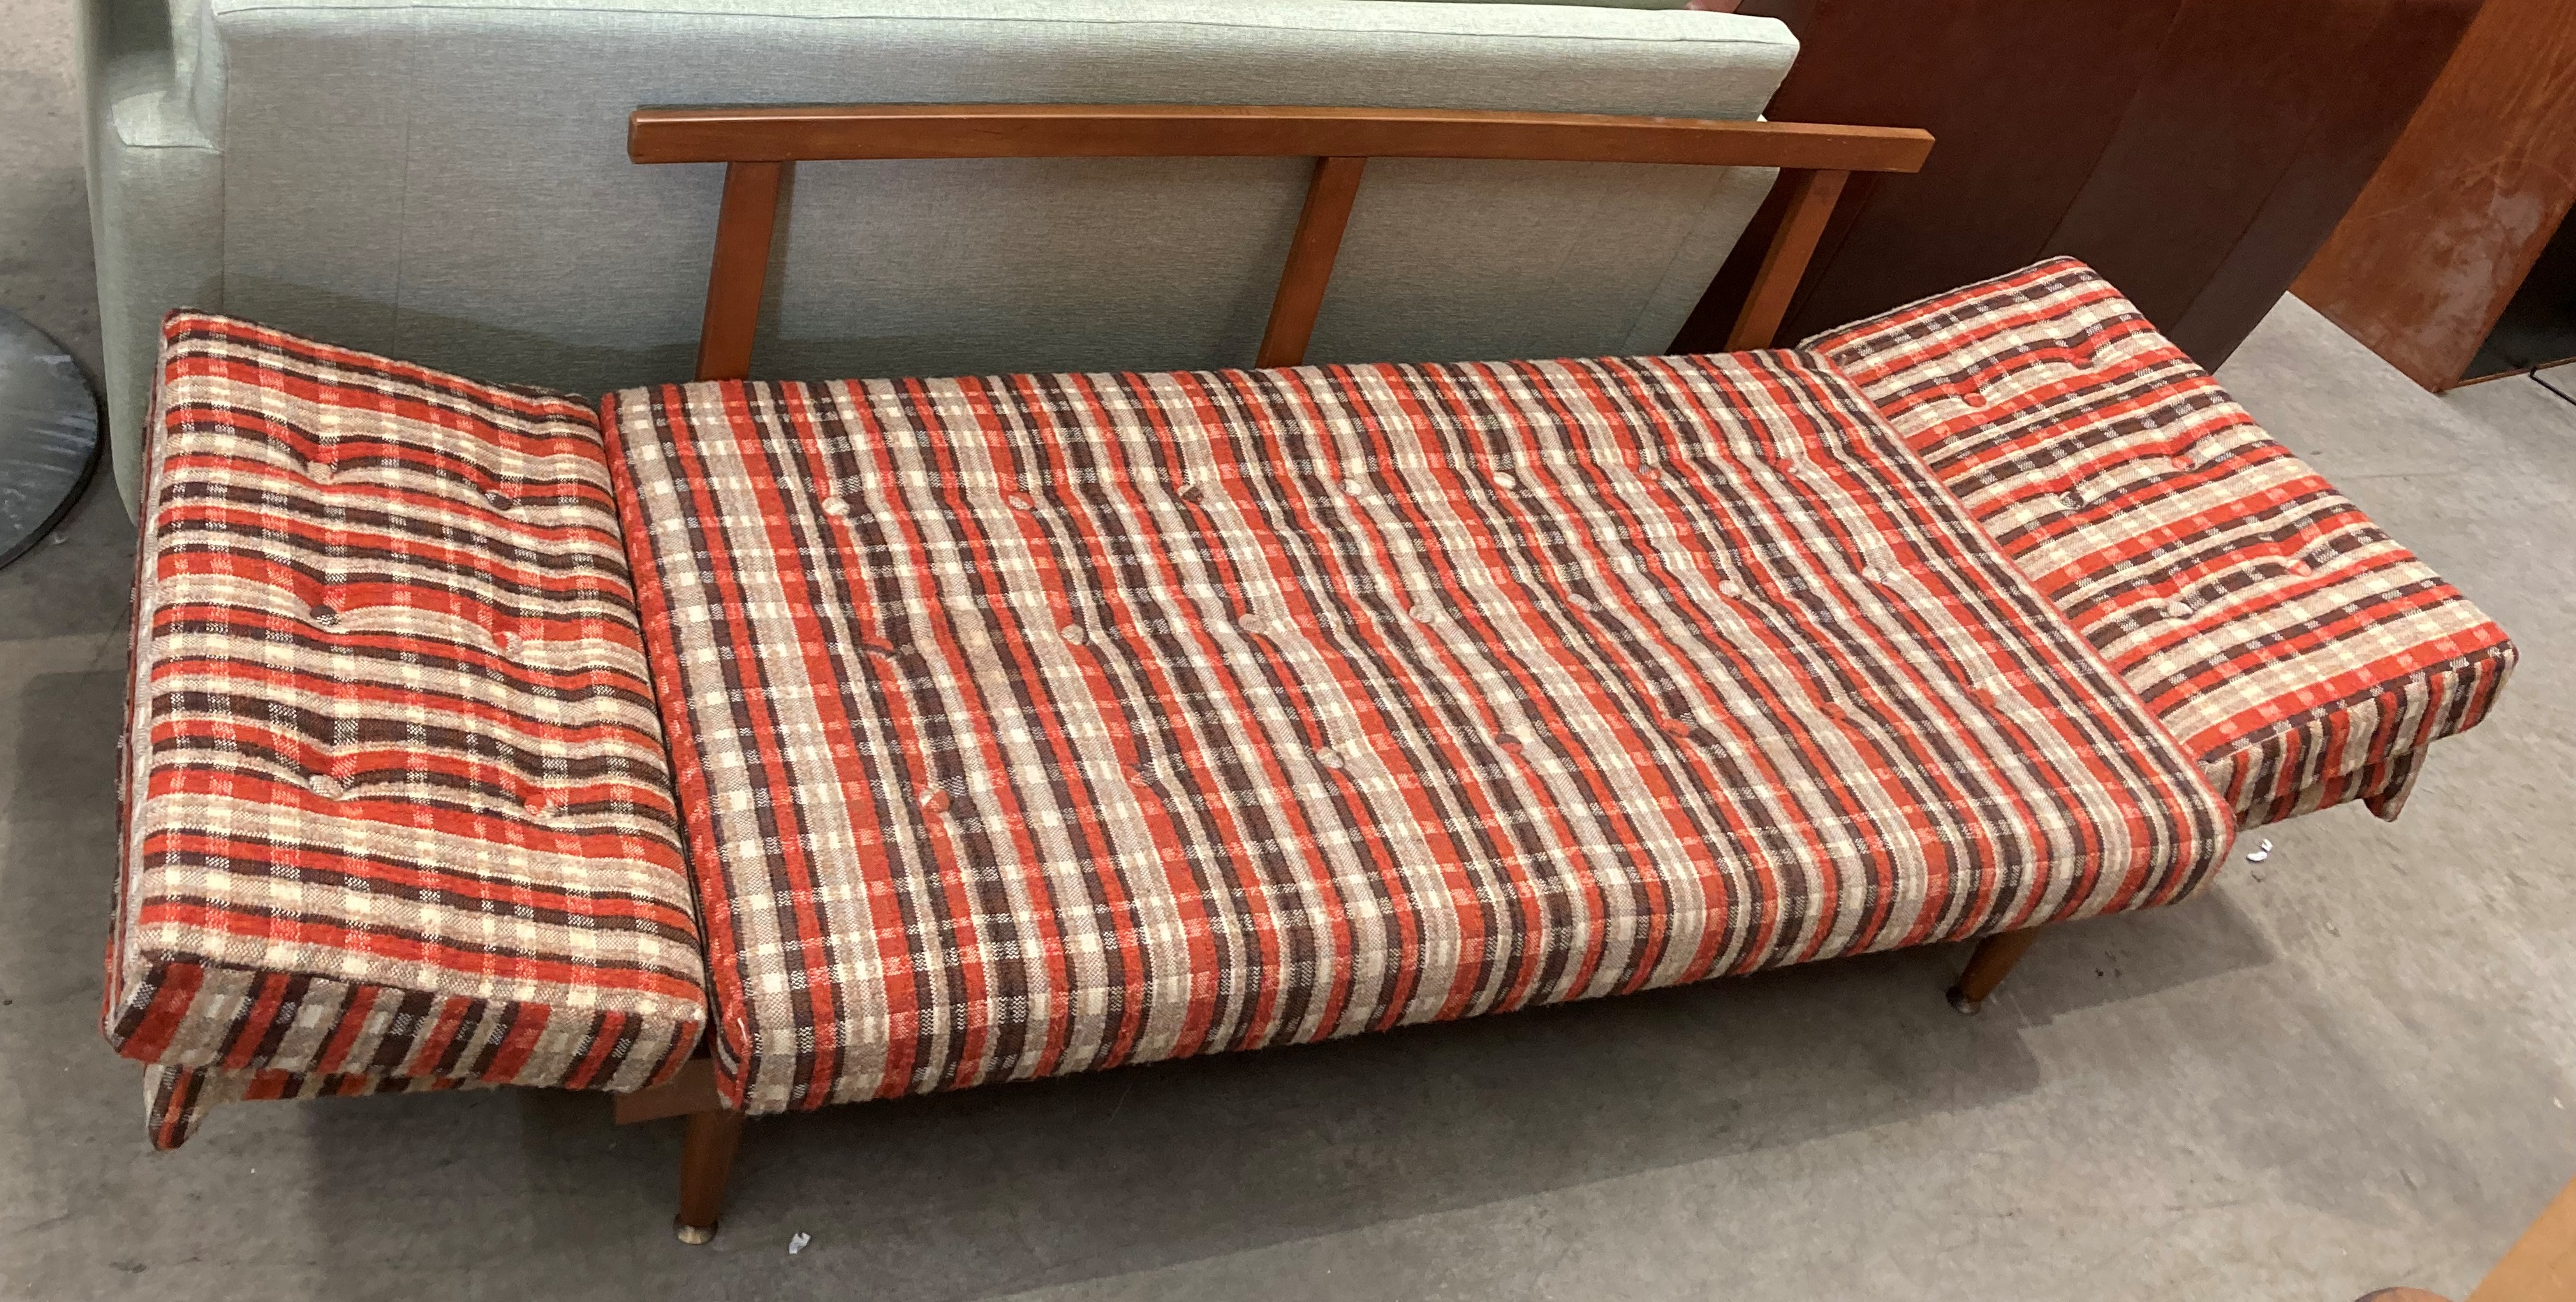 A mid Twentieth Century teak framed bed settee with brown/red and ivory patterned upholstery - - Image 3 of 4